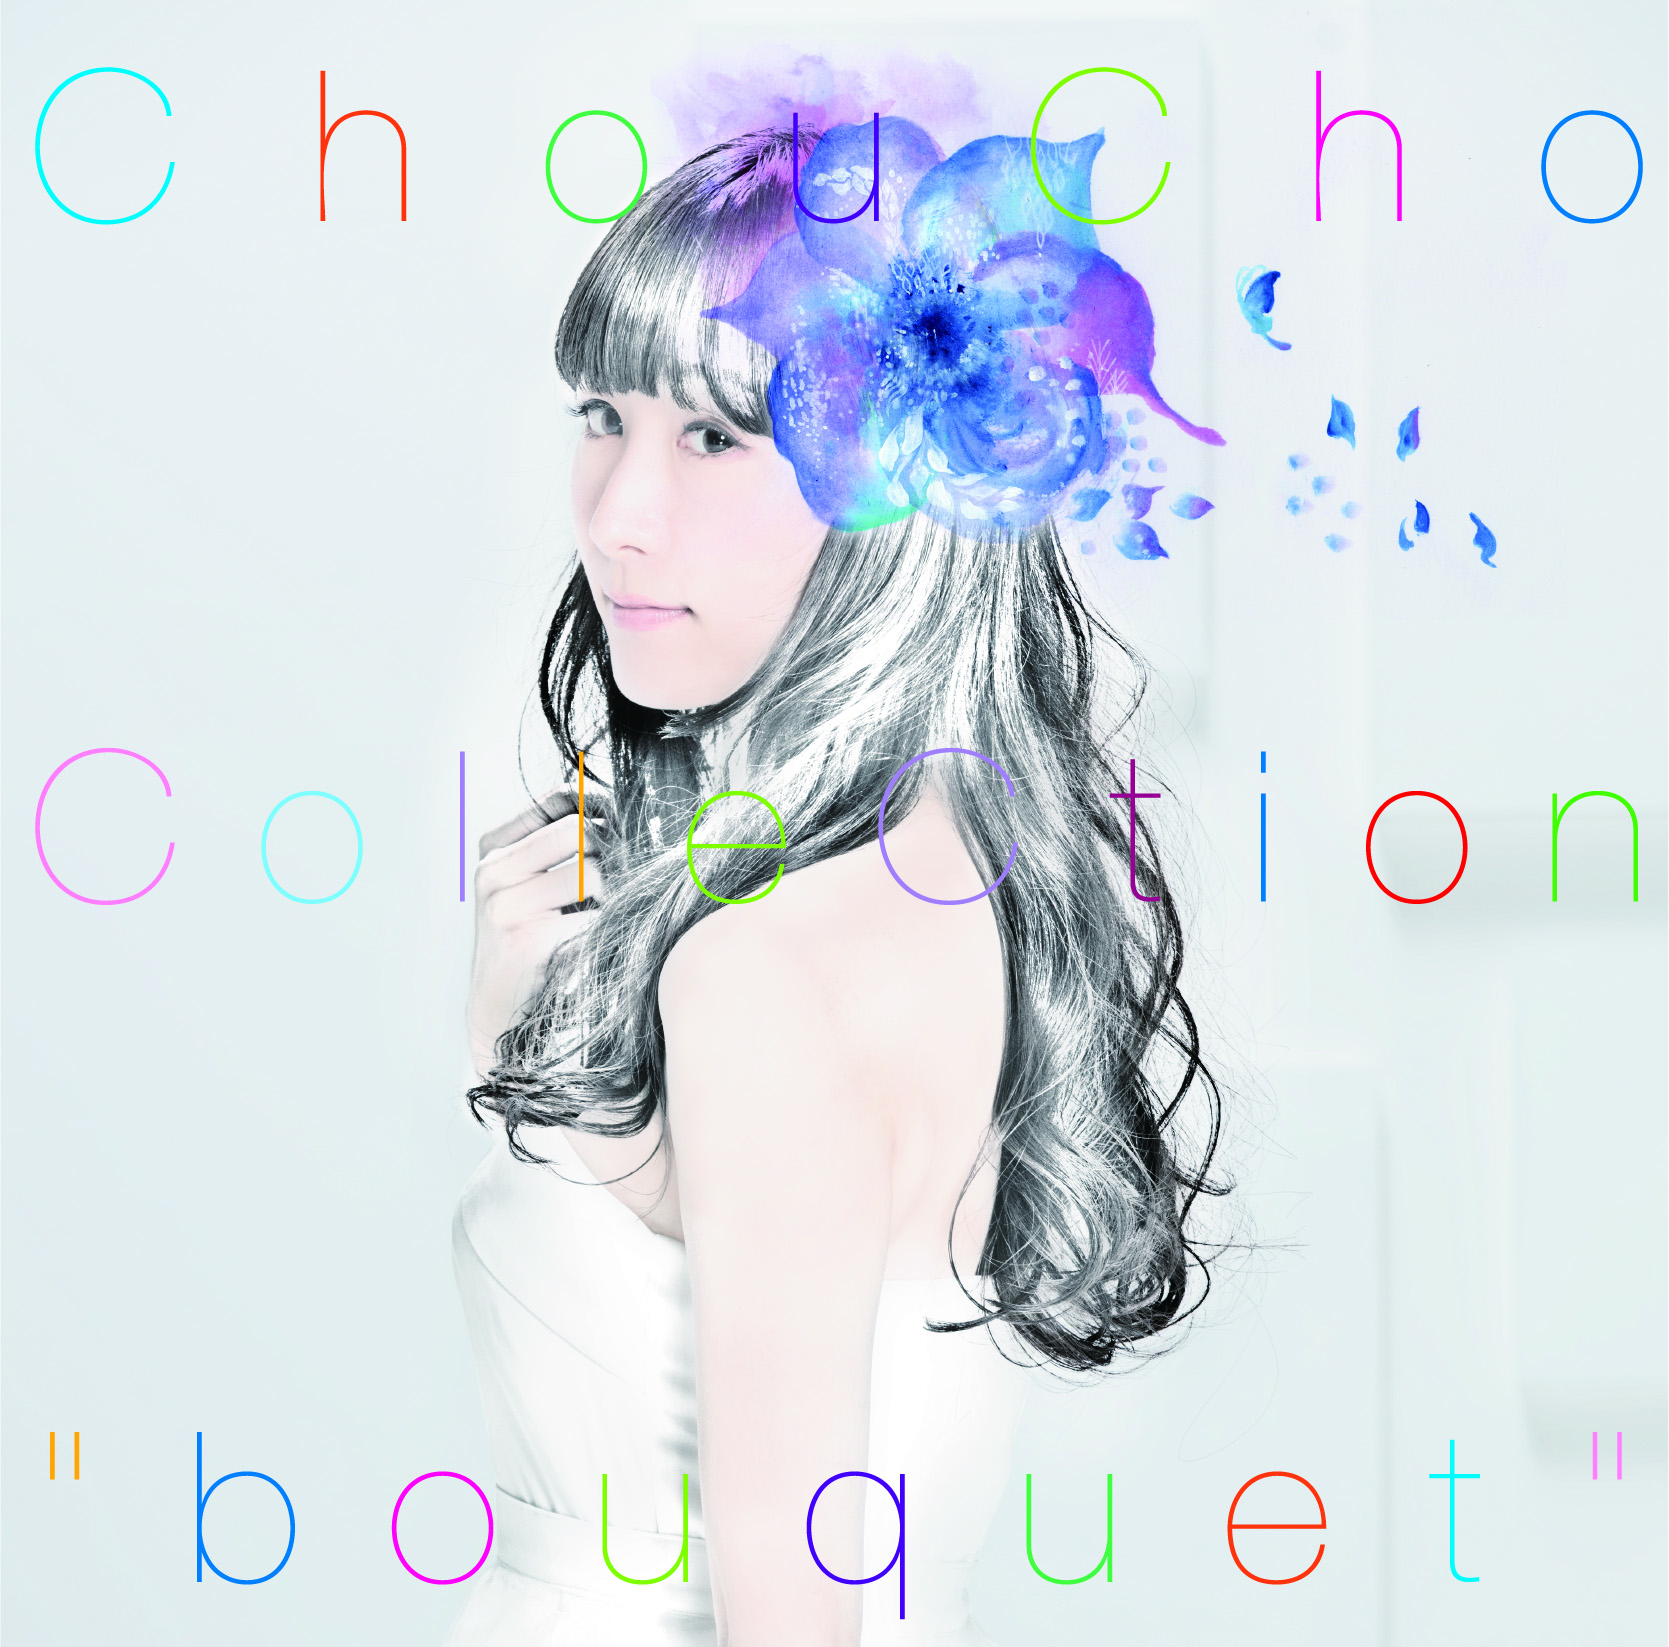 ChouCho『ChouCho ColleCtion “bouquet”』レビュー - 画像一覧（2/2）